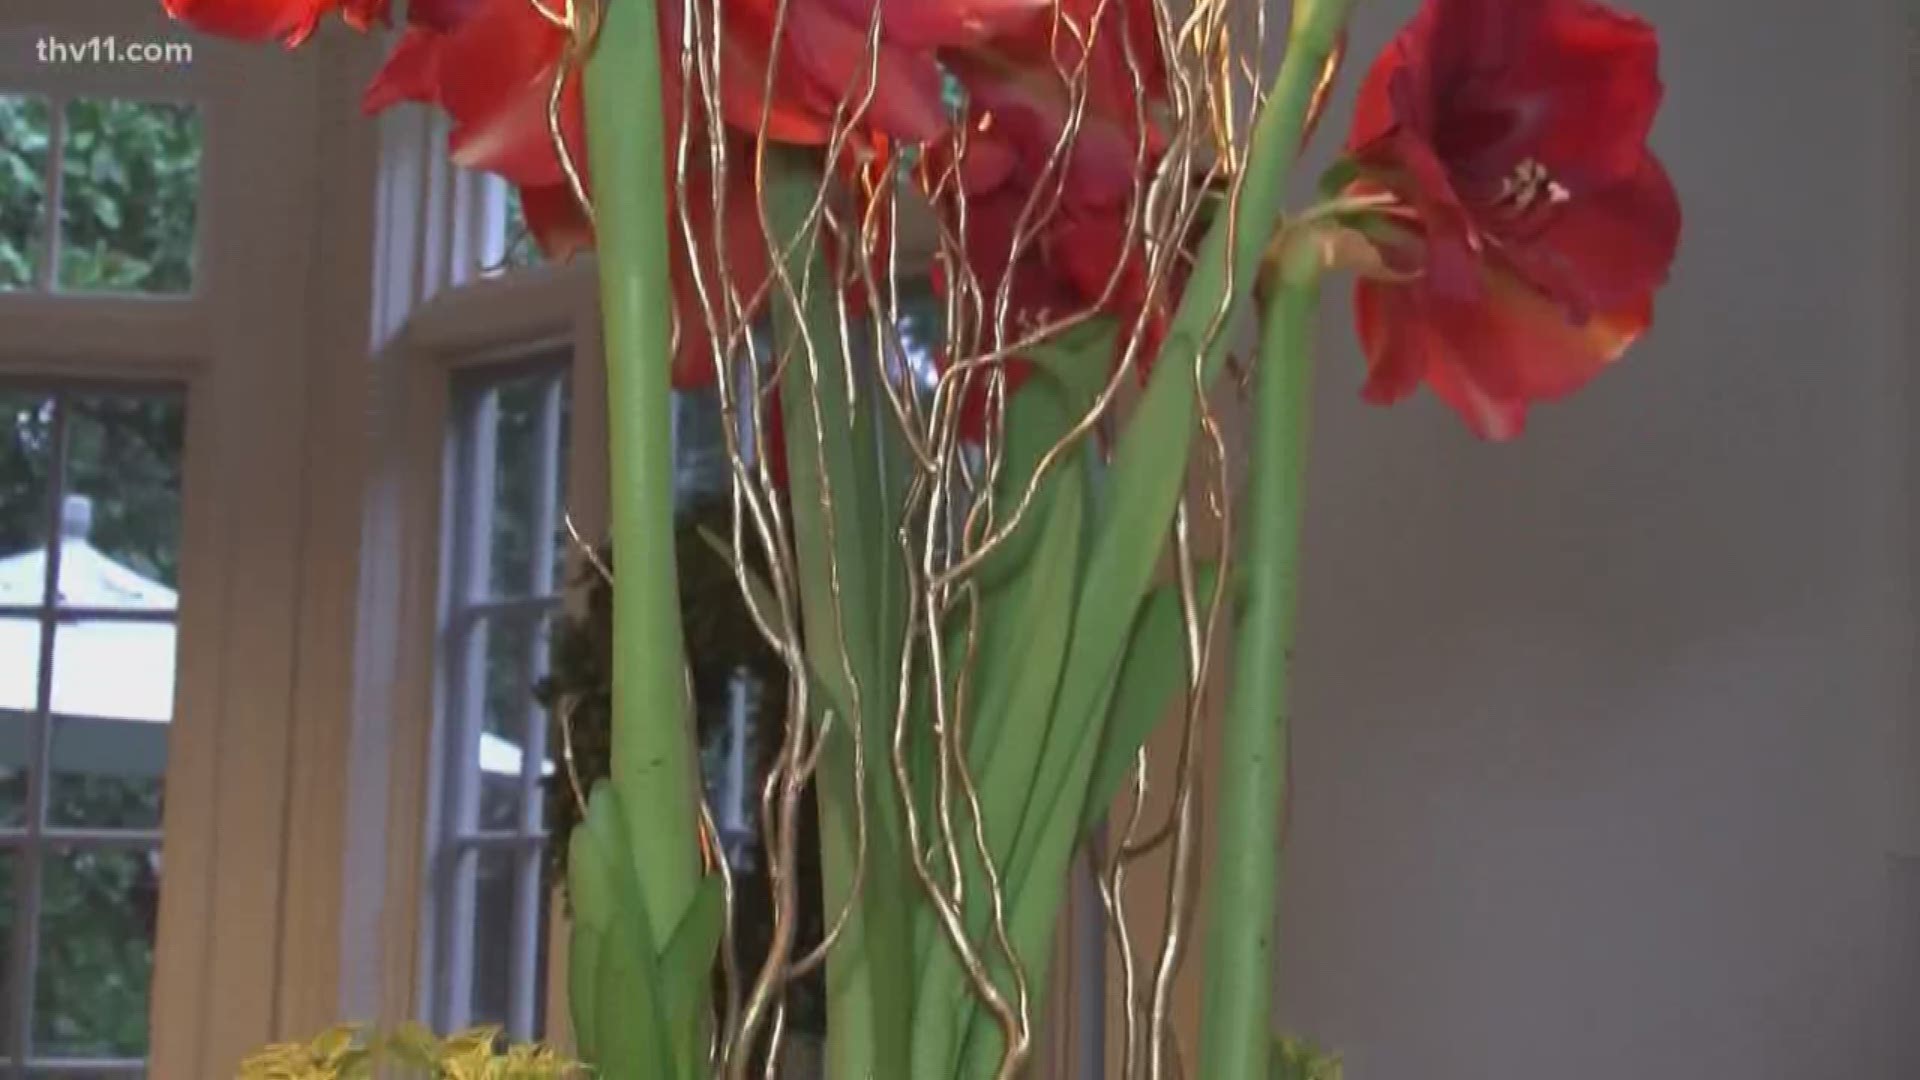 Looking to change things up? The amaryllis is a beautiful Christmas flower that isn't as popular.